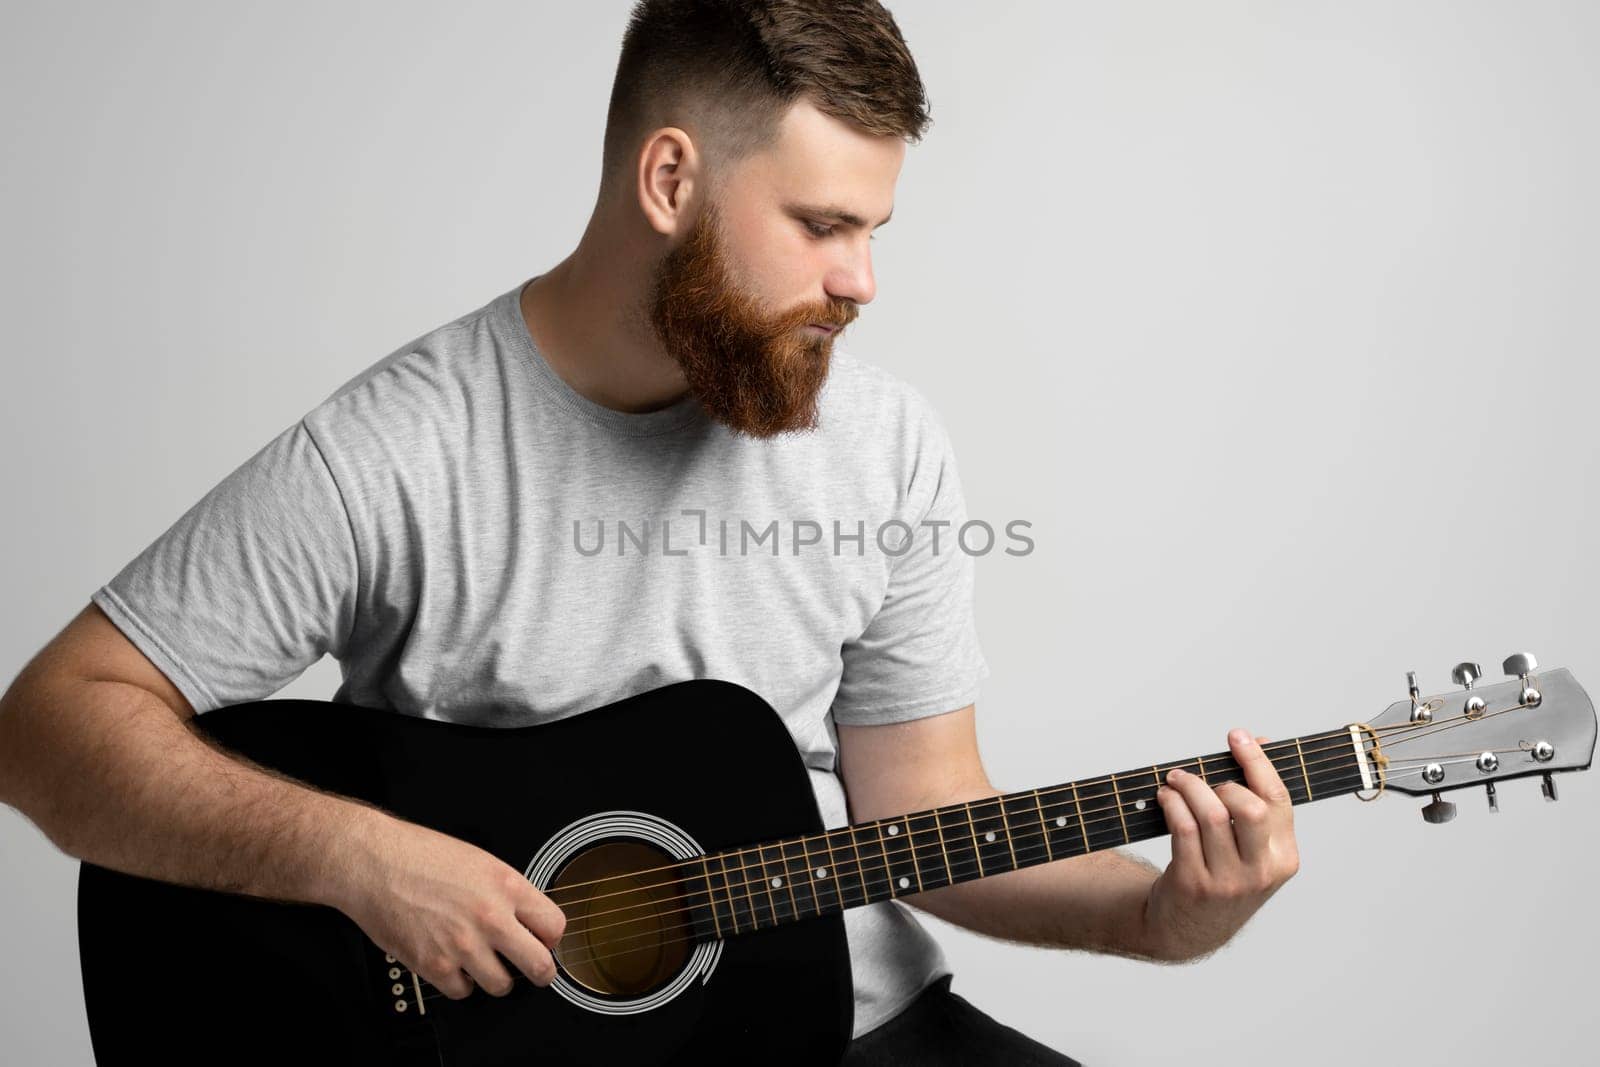 A young stylish men with a beard with a acoustic guitar on a white background. Music performer musician. Musical string instrument